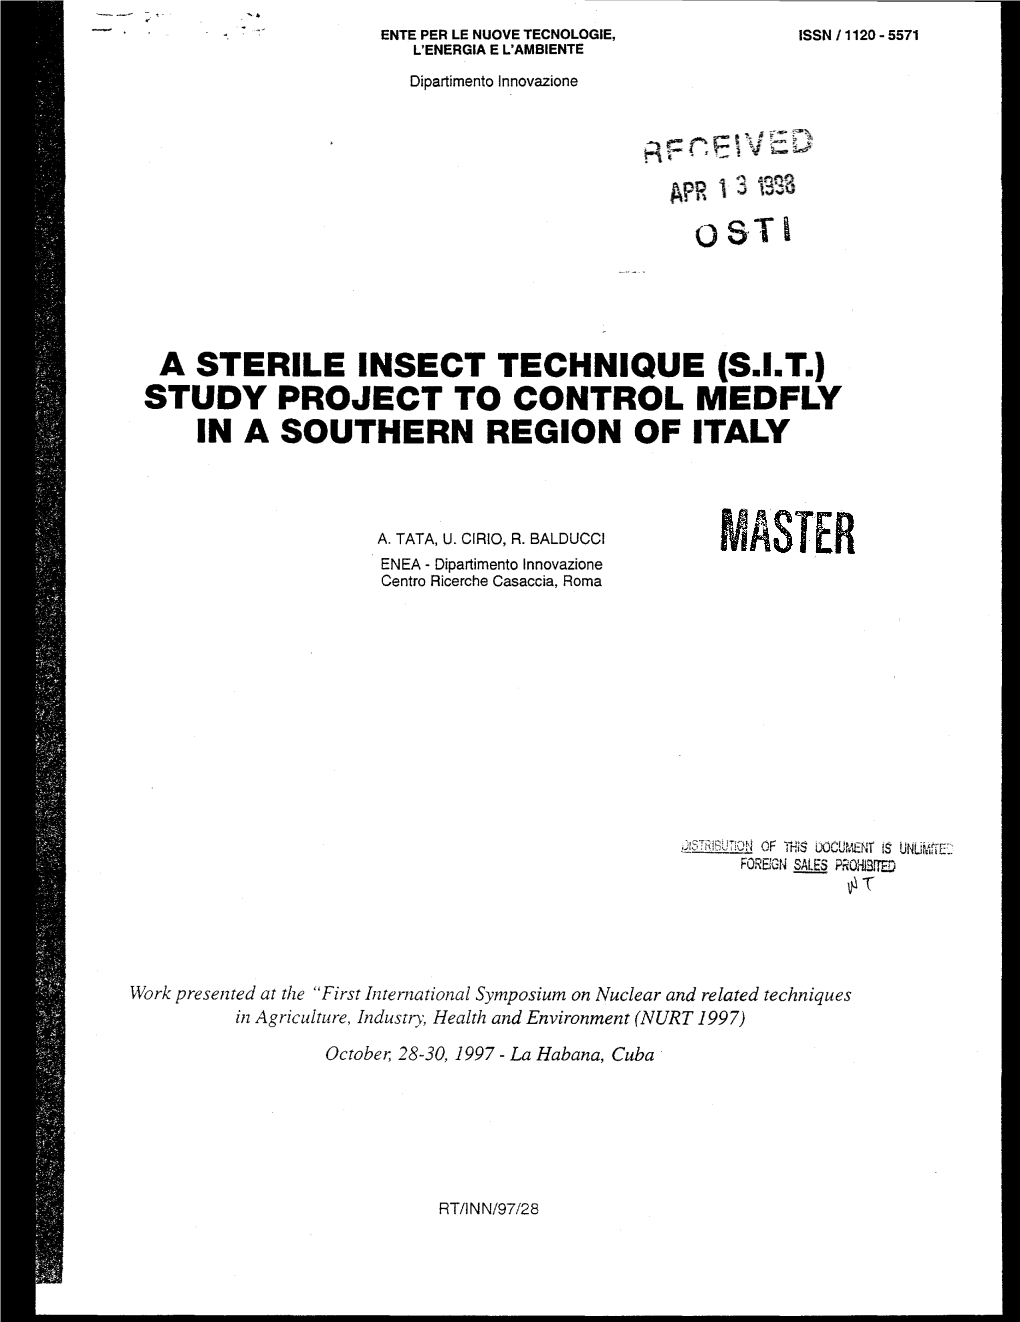 A STERILE INSECT TECHNIQUE (S.L.T.) STUDY PROJECT to CONTROL MEDFLY in a SOUTHERN REGION of ITALY